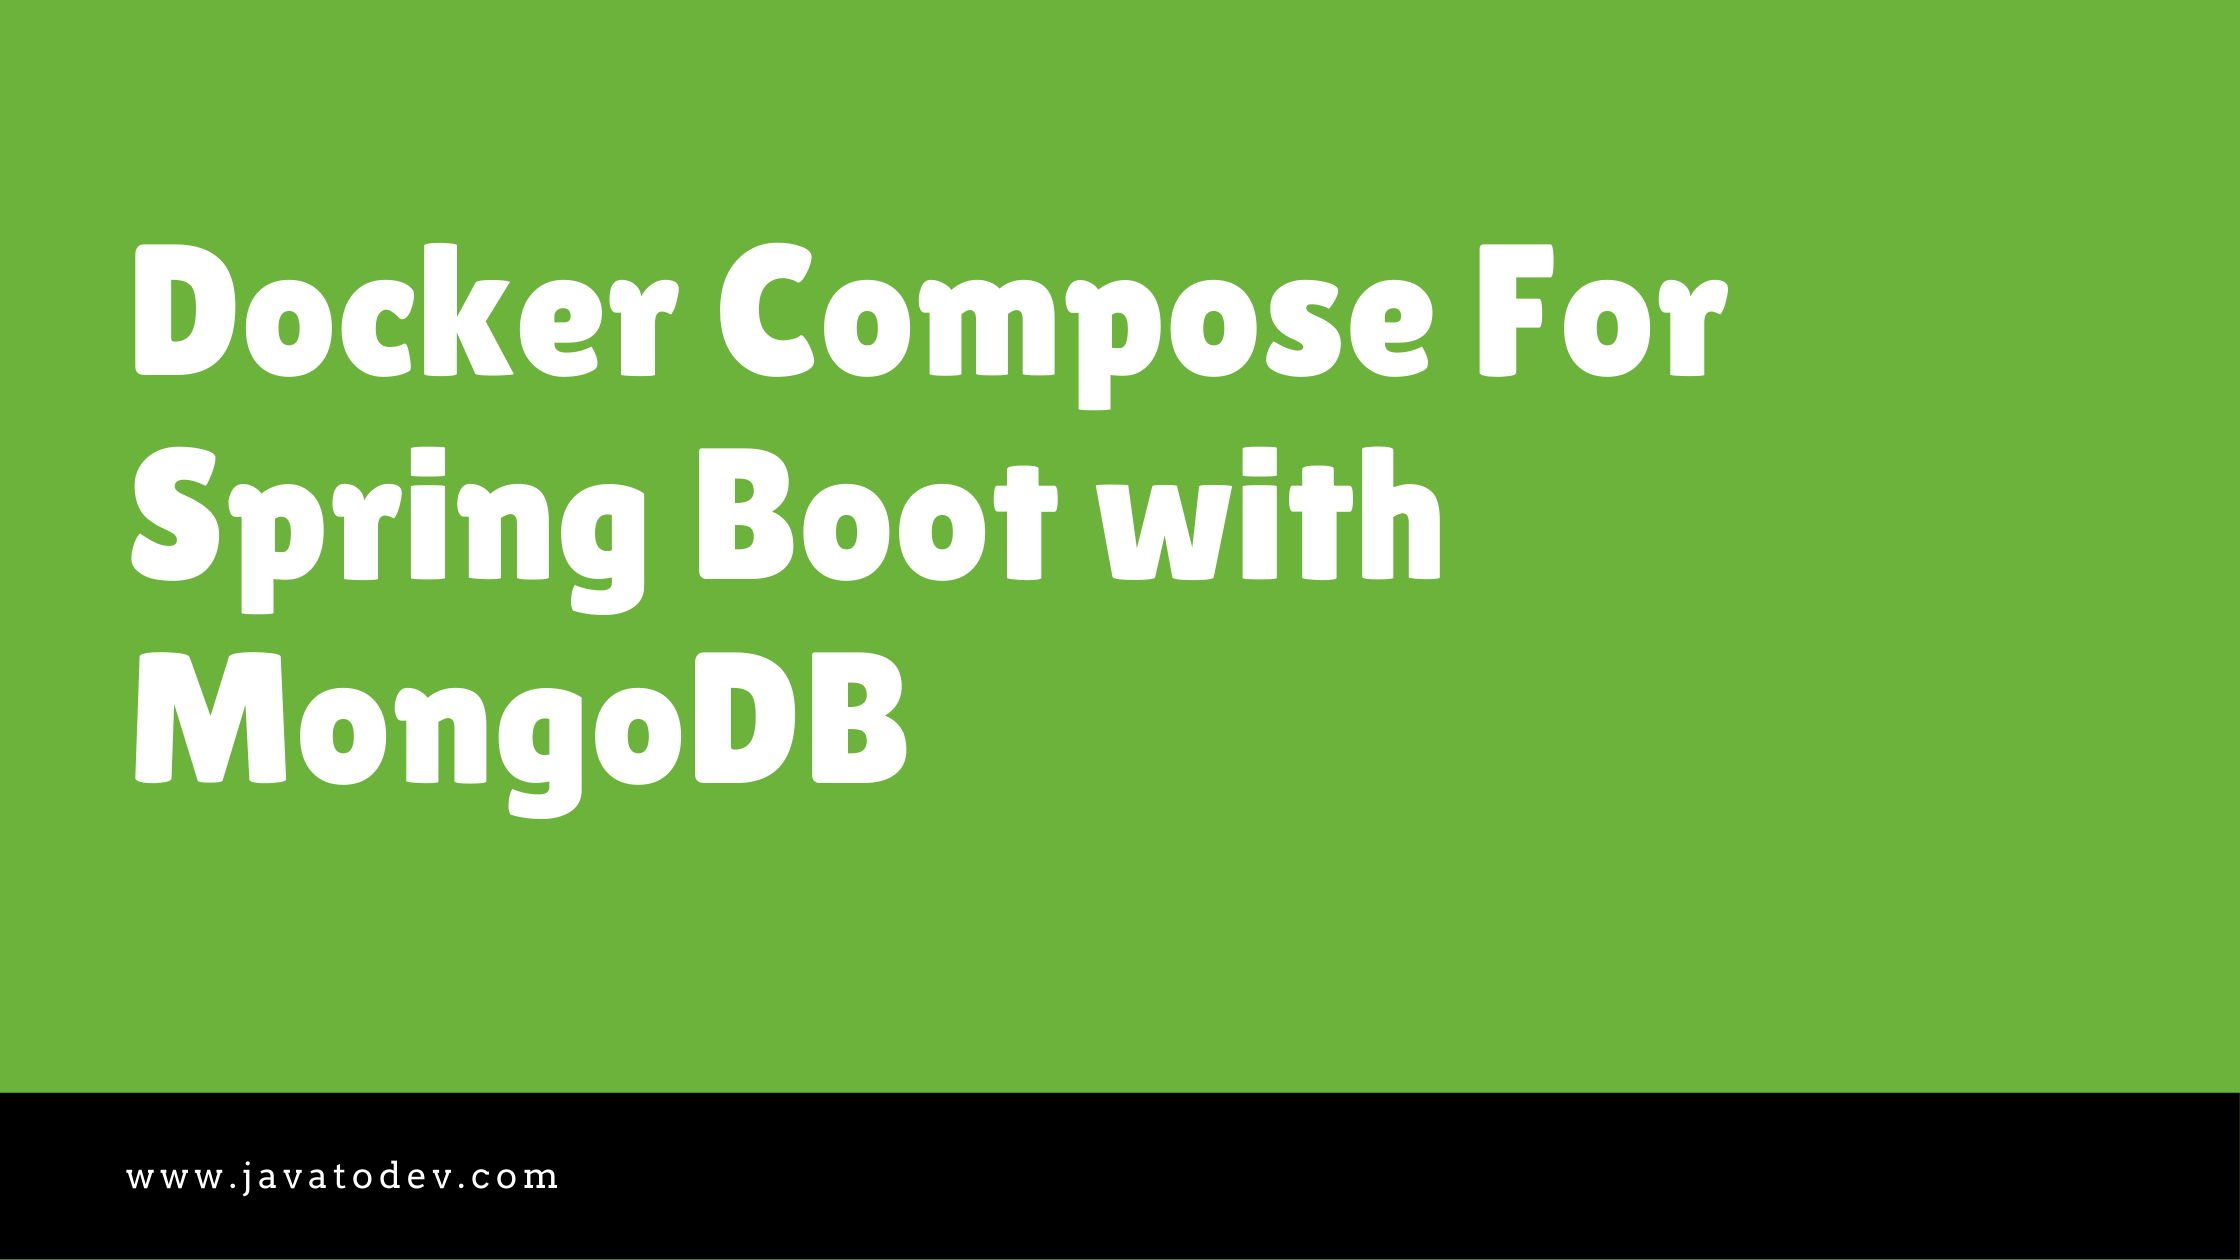 Docker Compose For Spring Boot with MongoDB